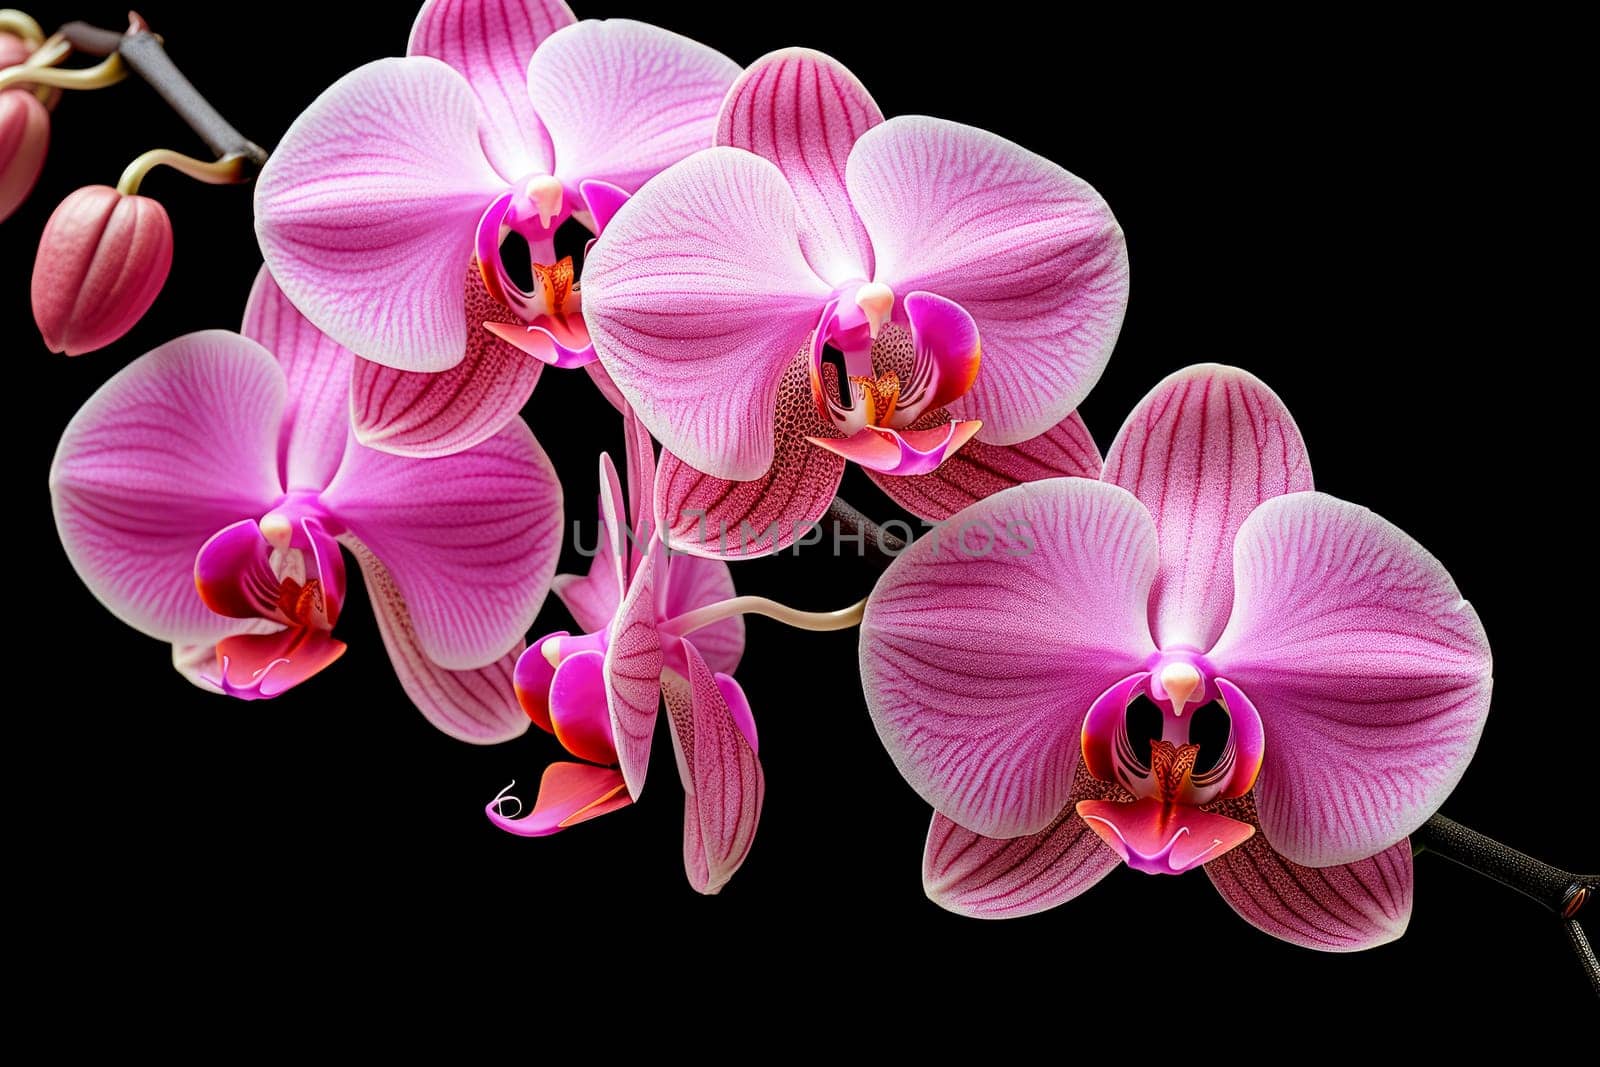 pink flower orchid Falinopsis on black background. Isolated object by Ramanouskaya